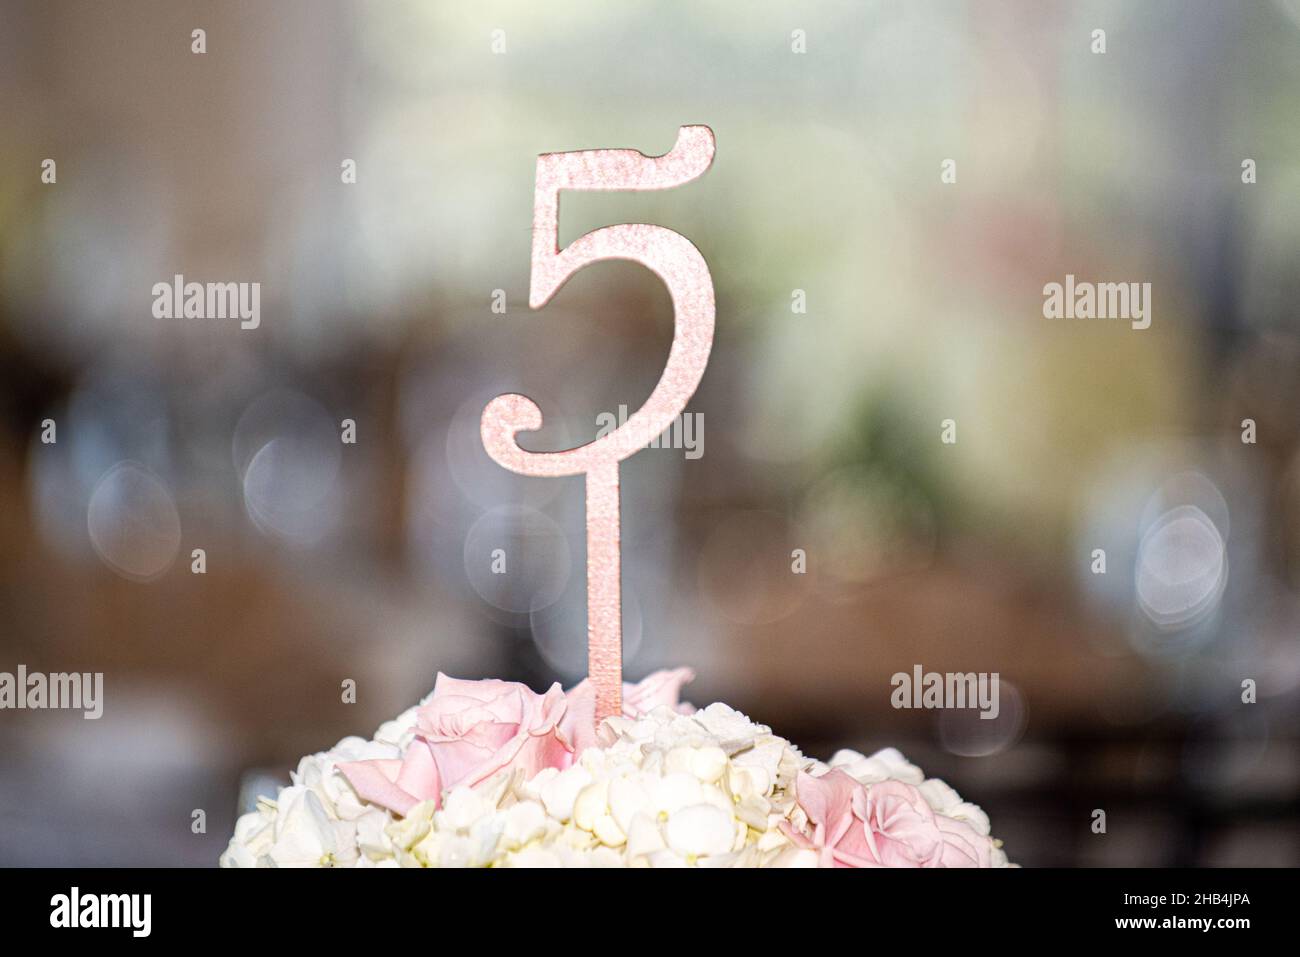 Pink number five guest place indicator sign in flowers at elegant wedding reception table Stock Photo